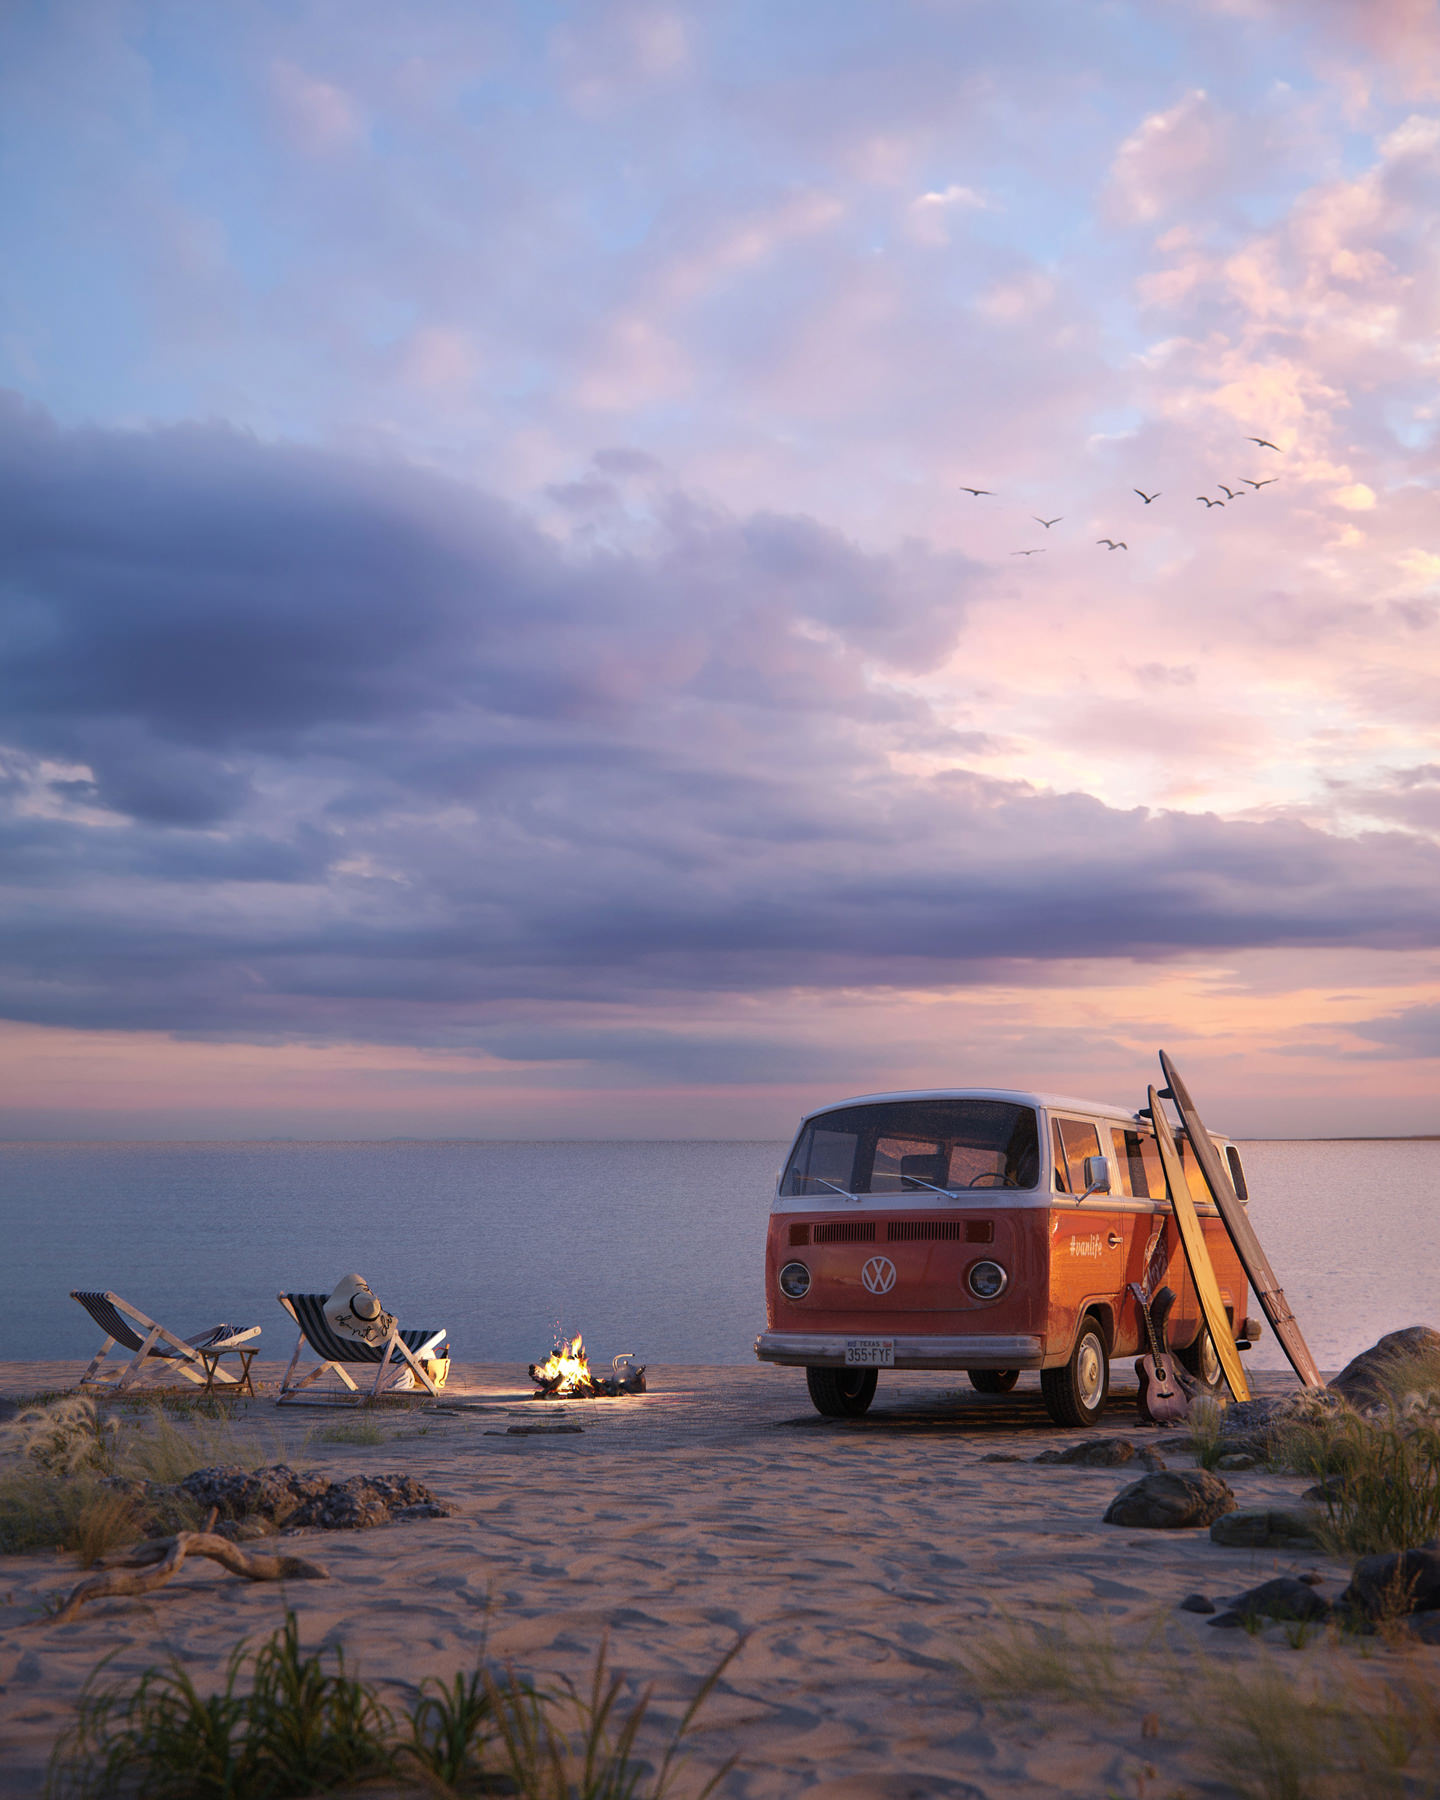 Photo realistic render of a red retro van parked next to lounge chairs and a campfire on the beach making it a comfortable place to enjoy the sunset over the ocean